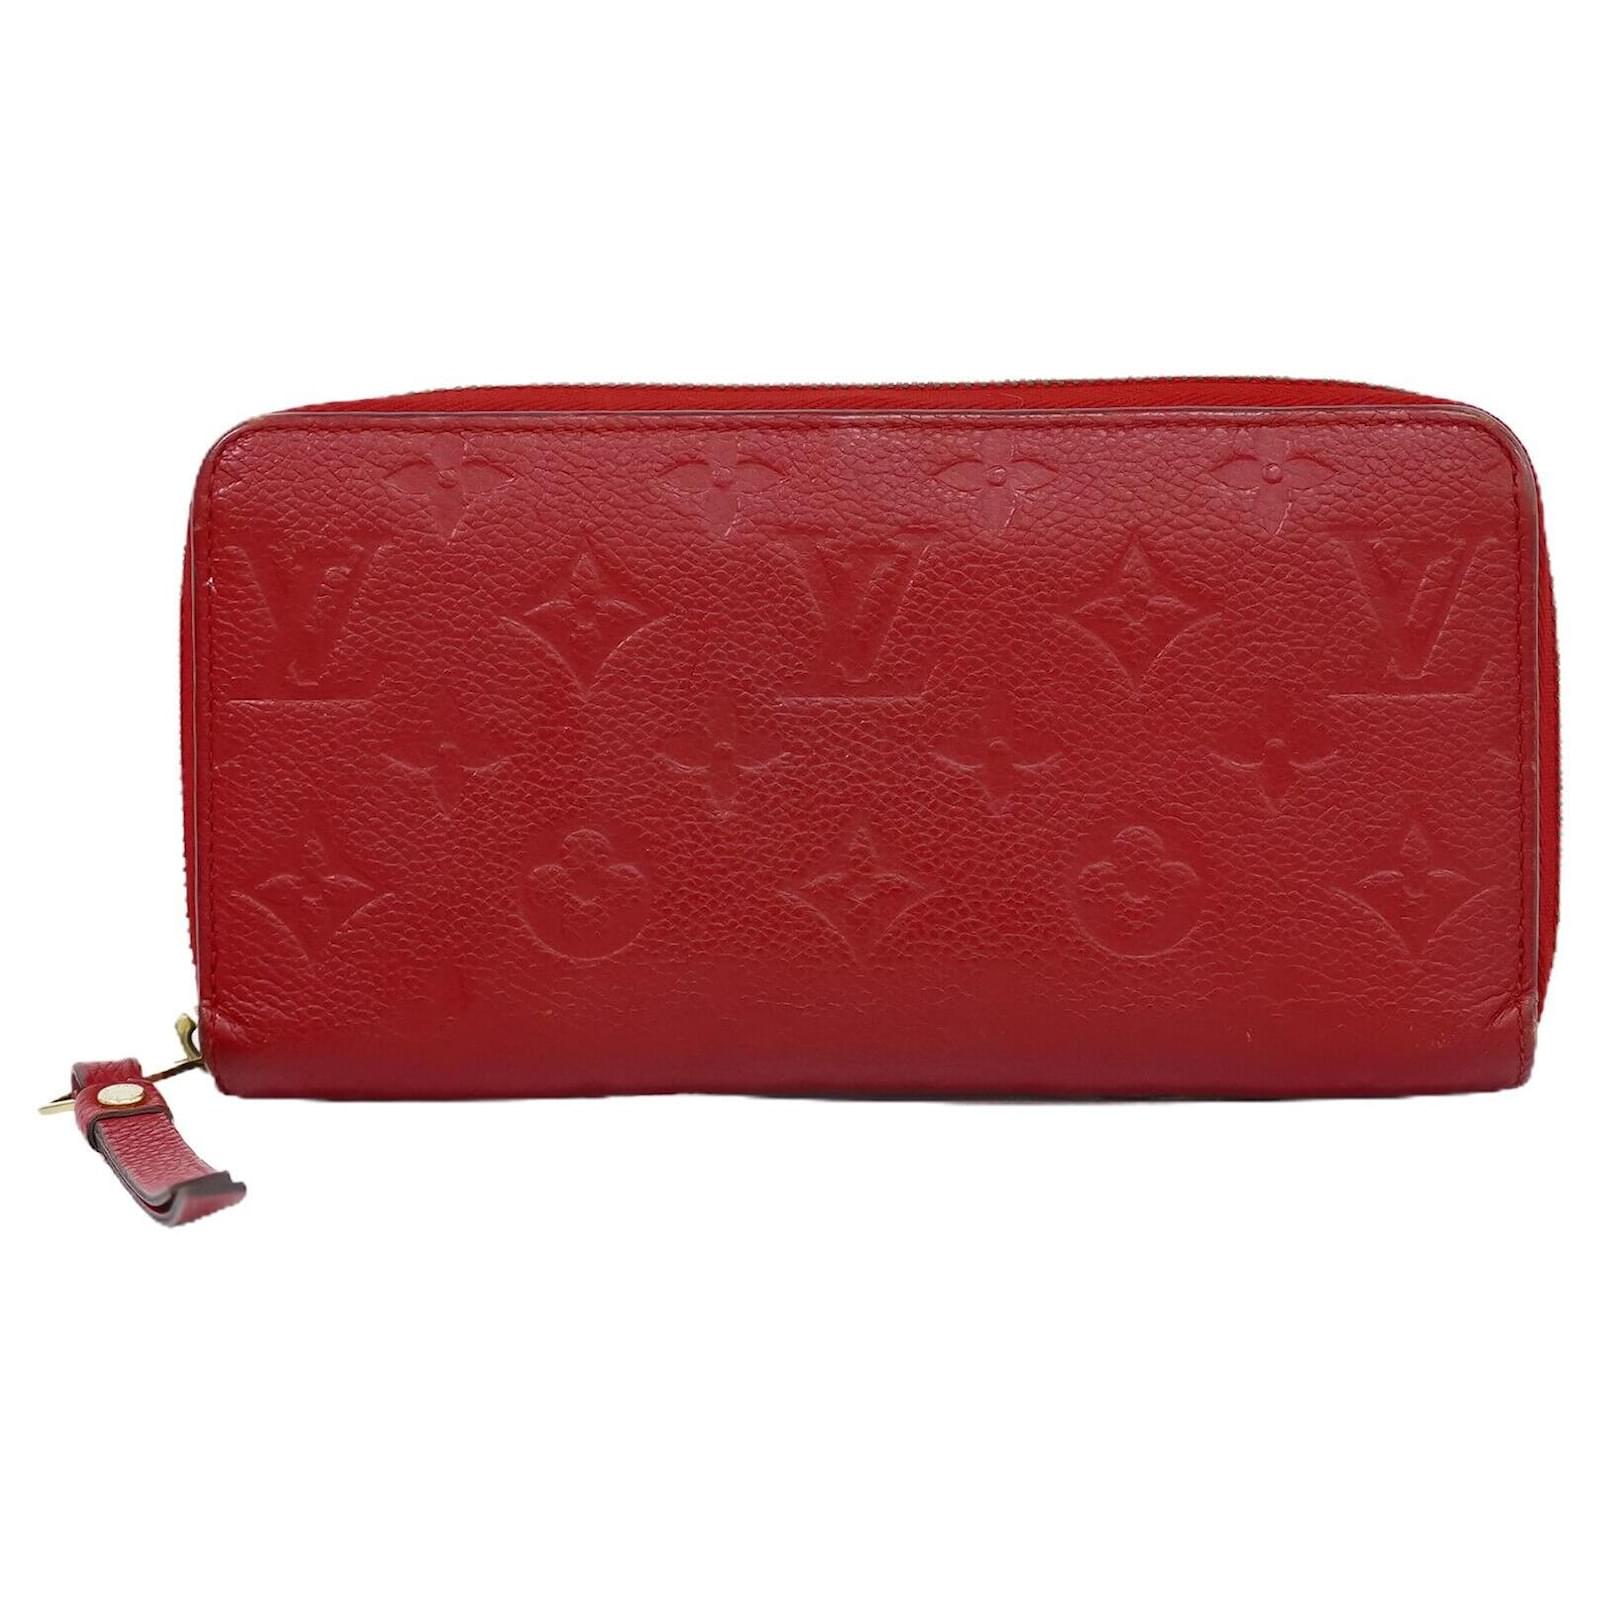 Louis Vuitton Portefeuille Zippy Red Leather Wallet (Pre-Owned)